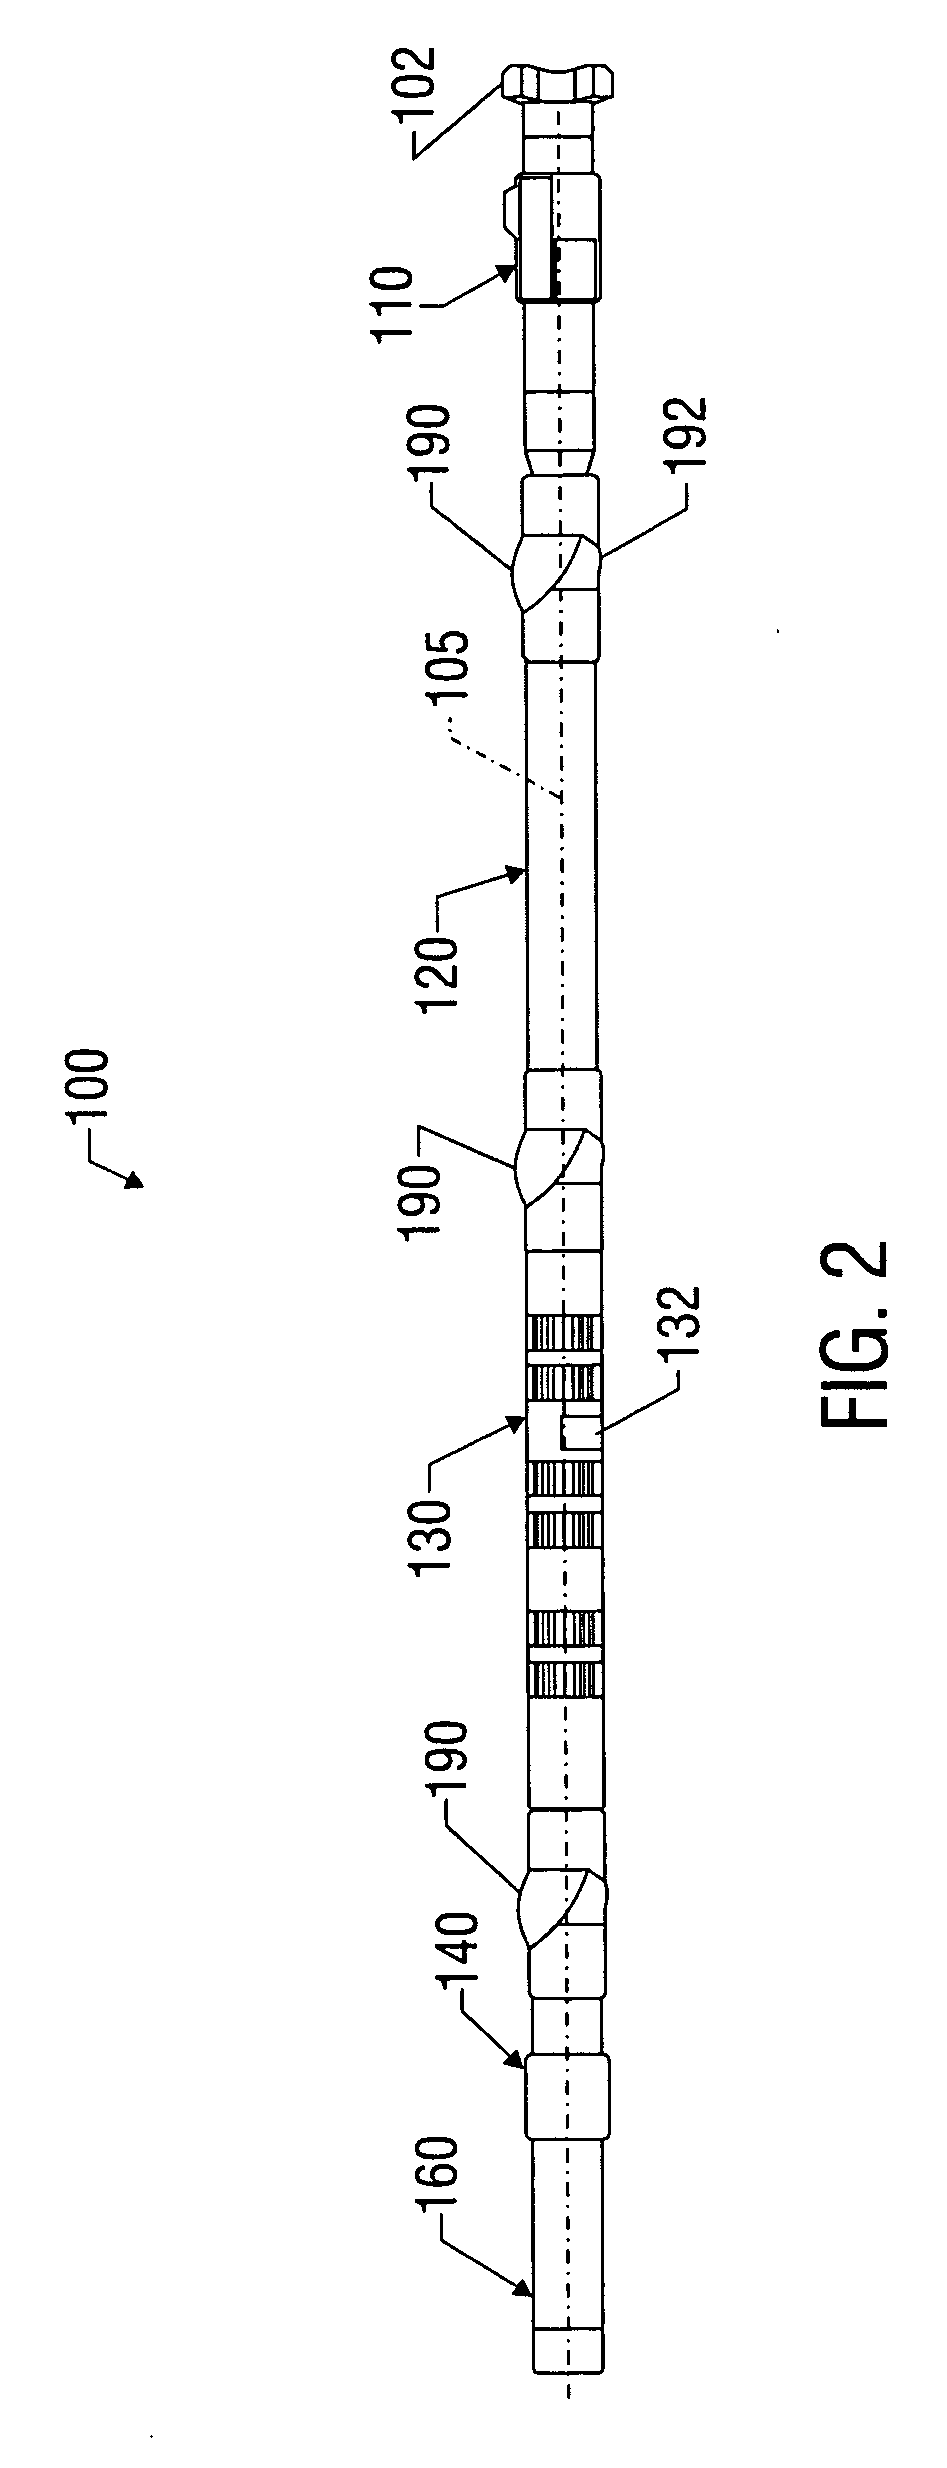 Modular drilling apparatus with power and/or data transmission